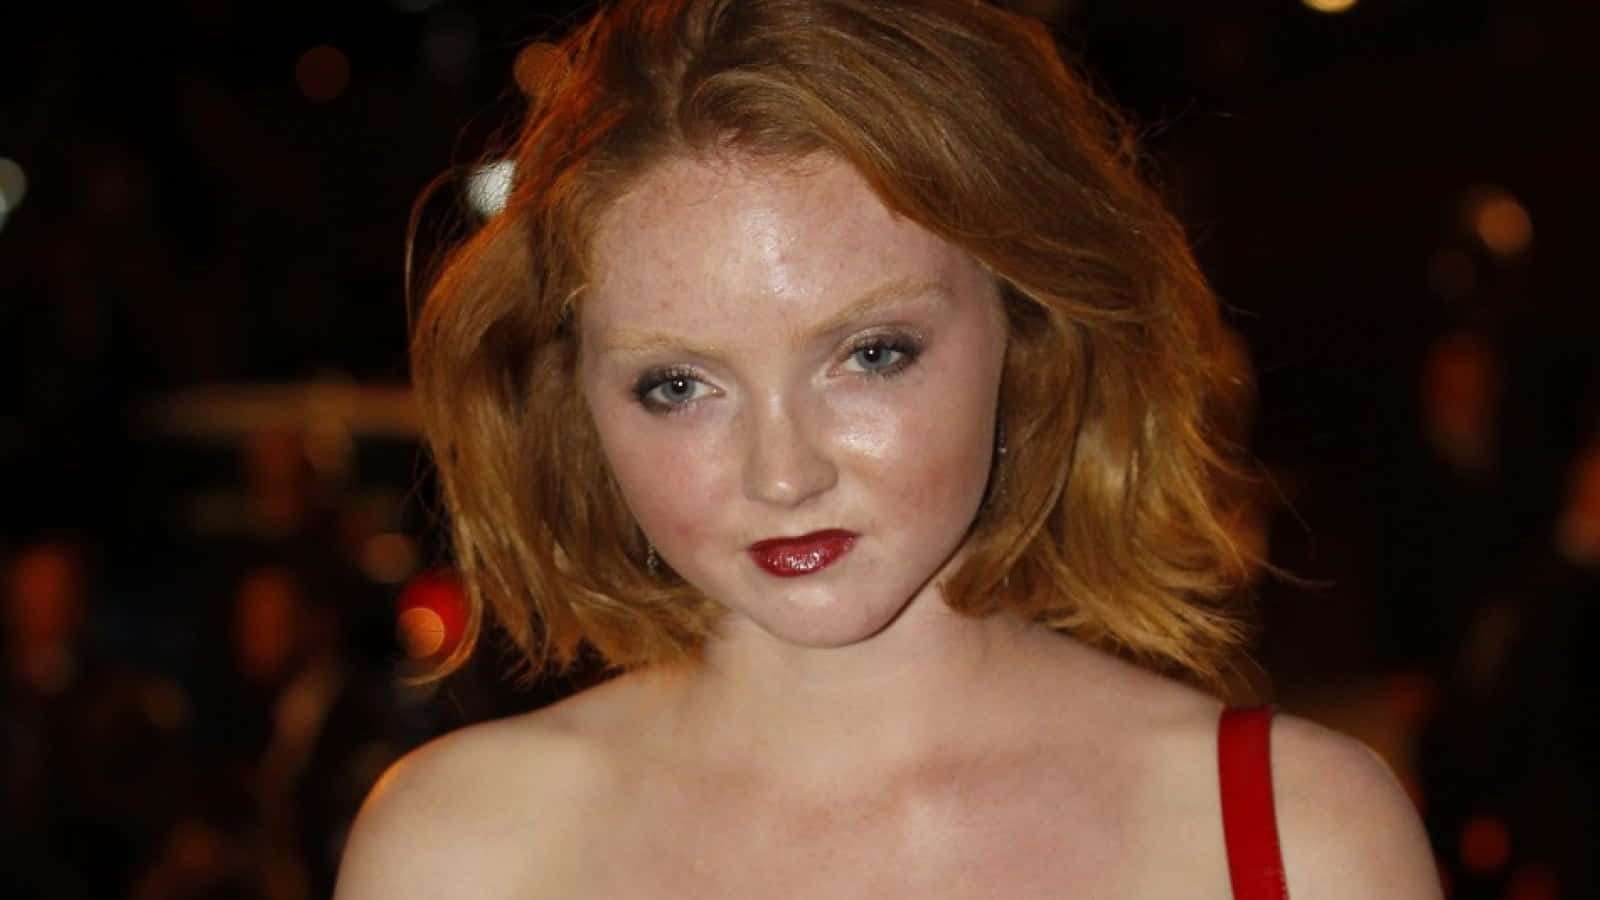 A Stunning Portrait Of Lily Cole Wallpaper